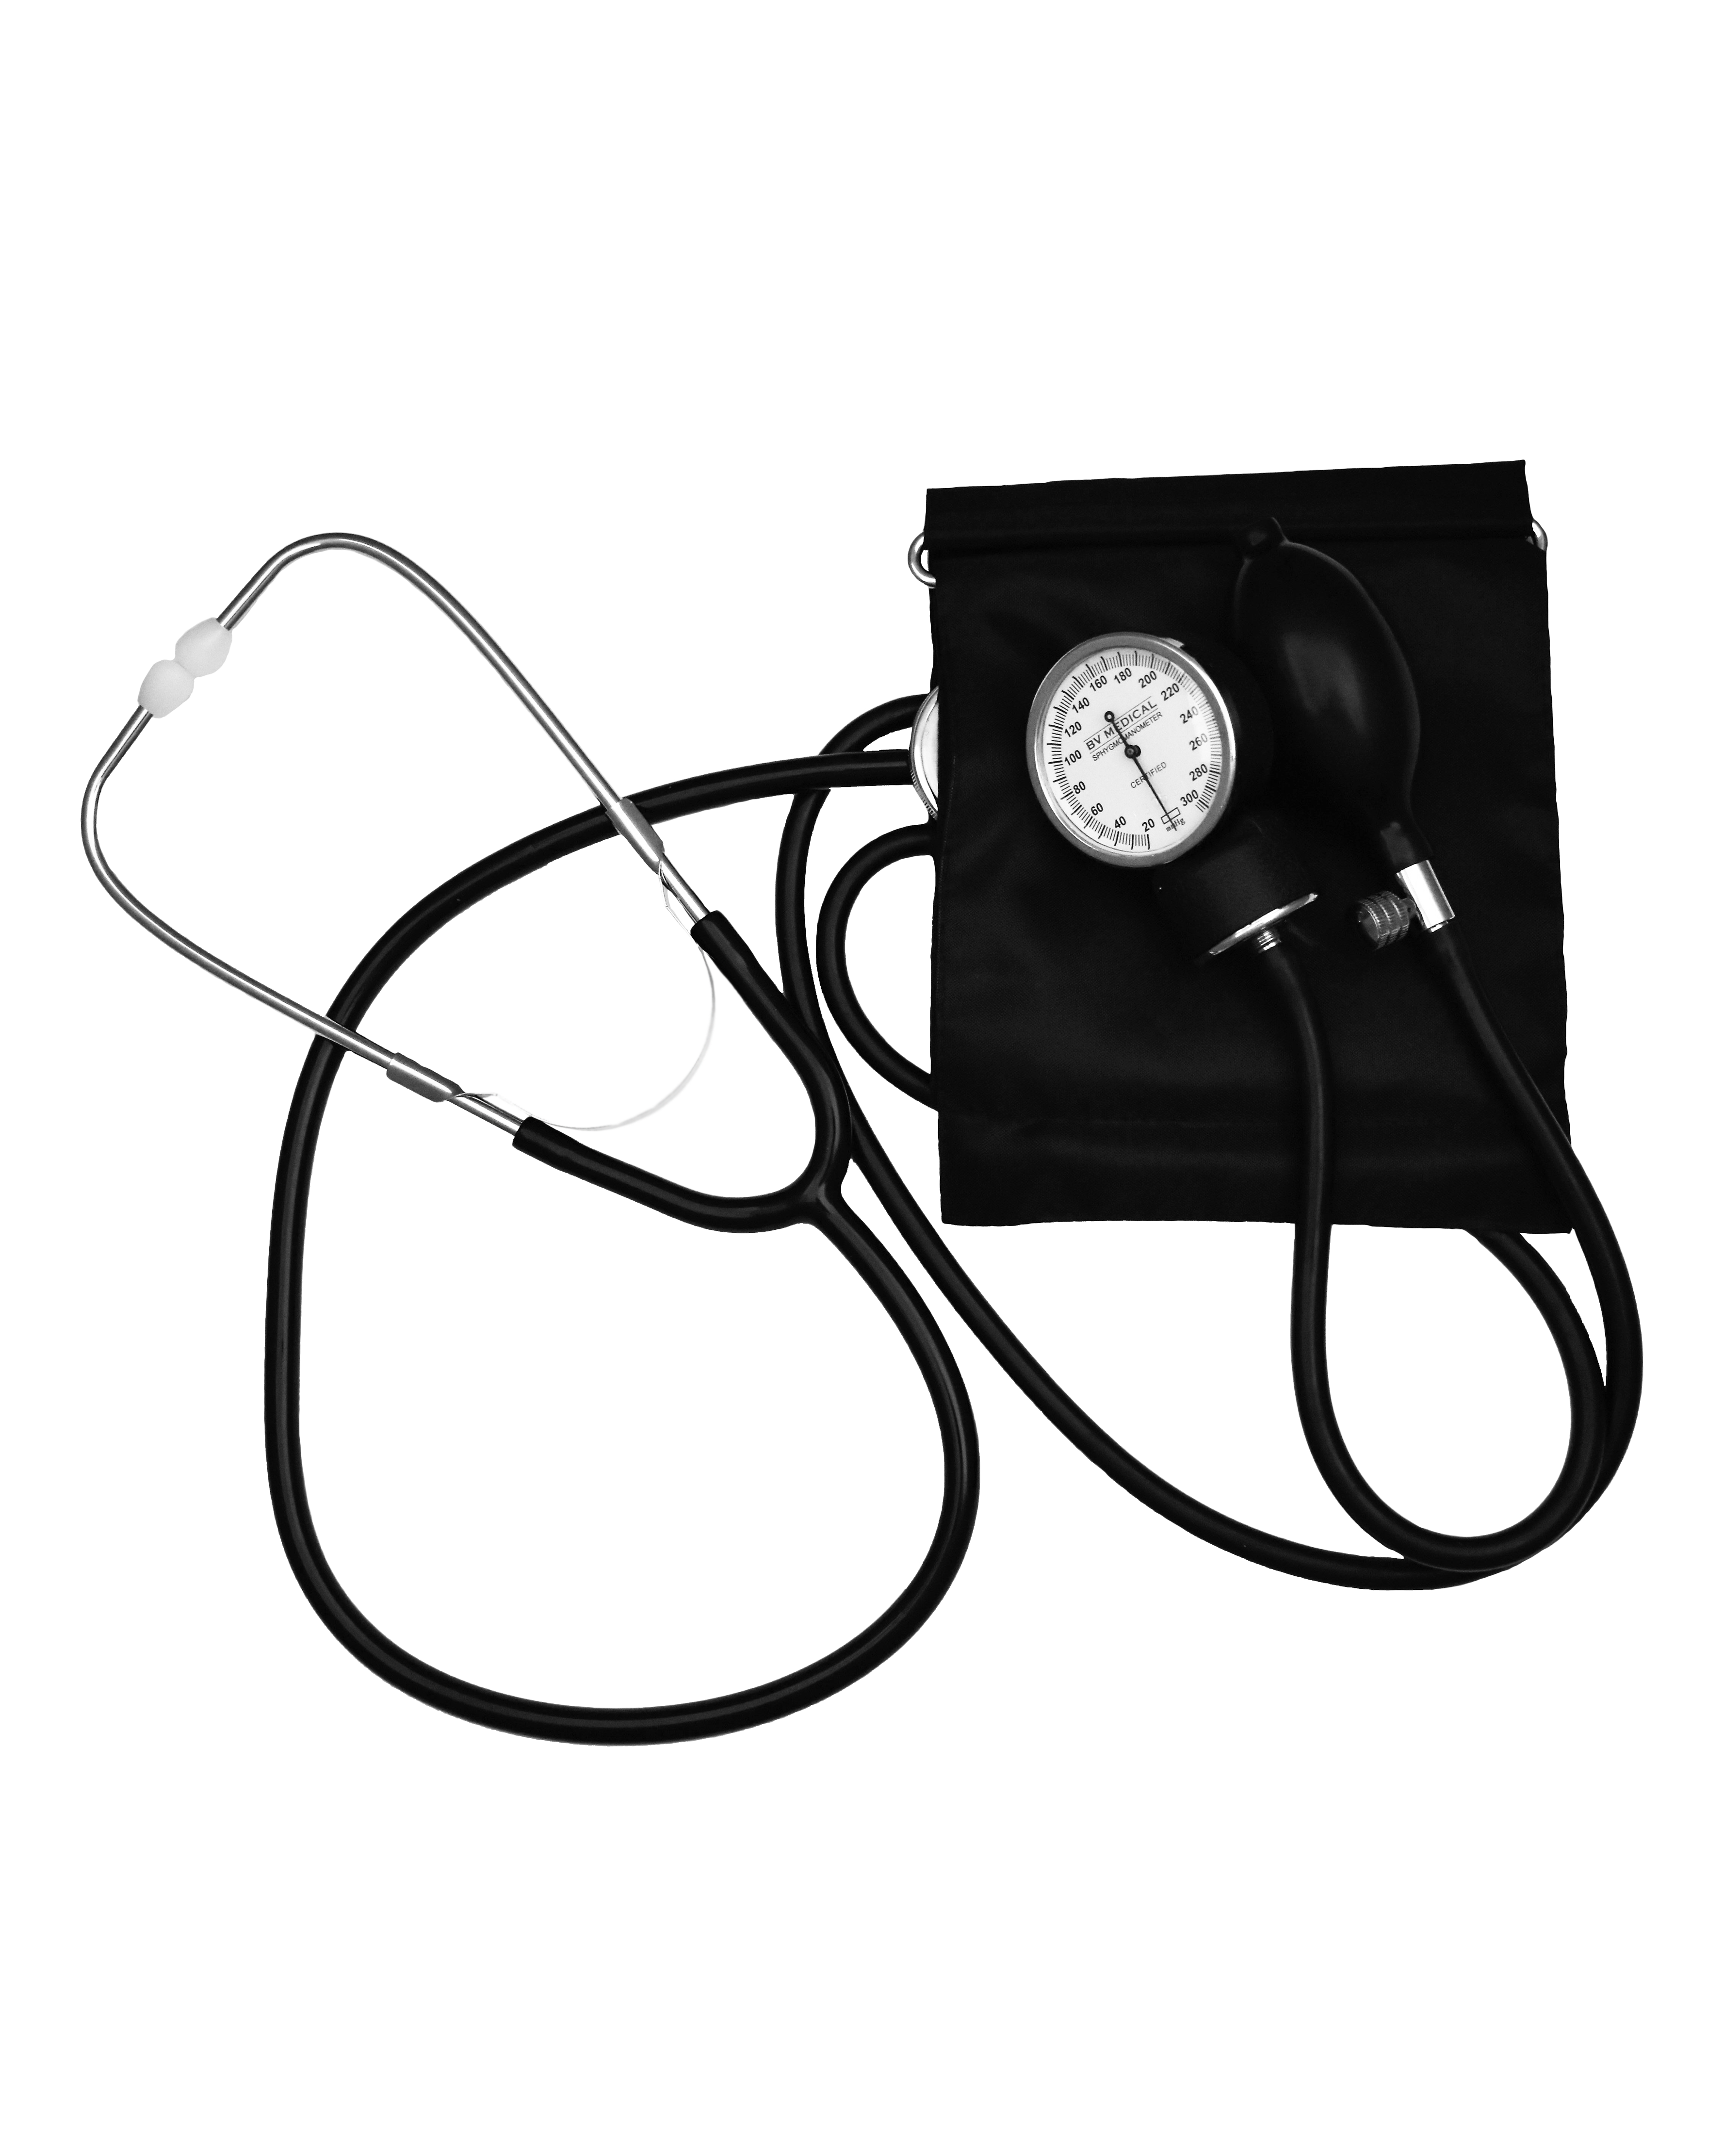 Blood Pressure Monitor Kit, Miscellaneous: Bernell Corporation